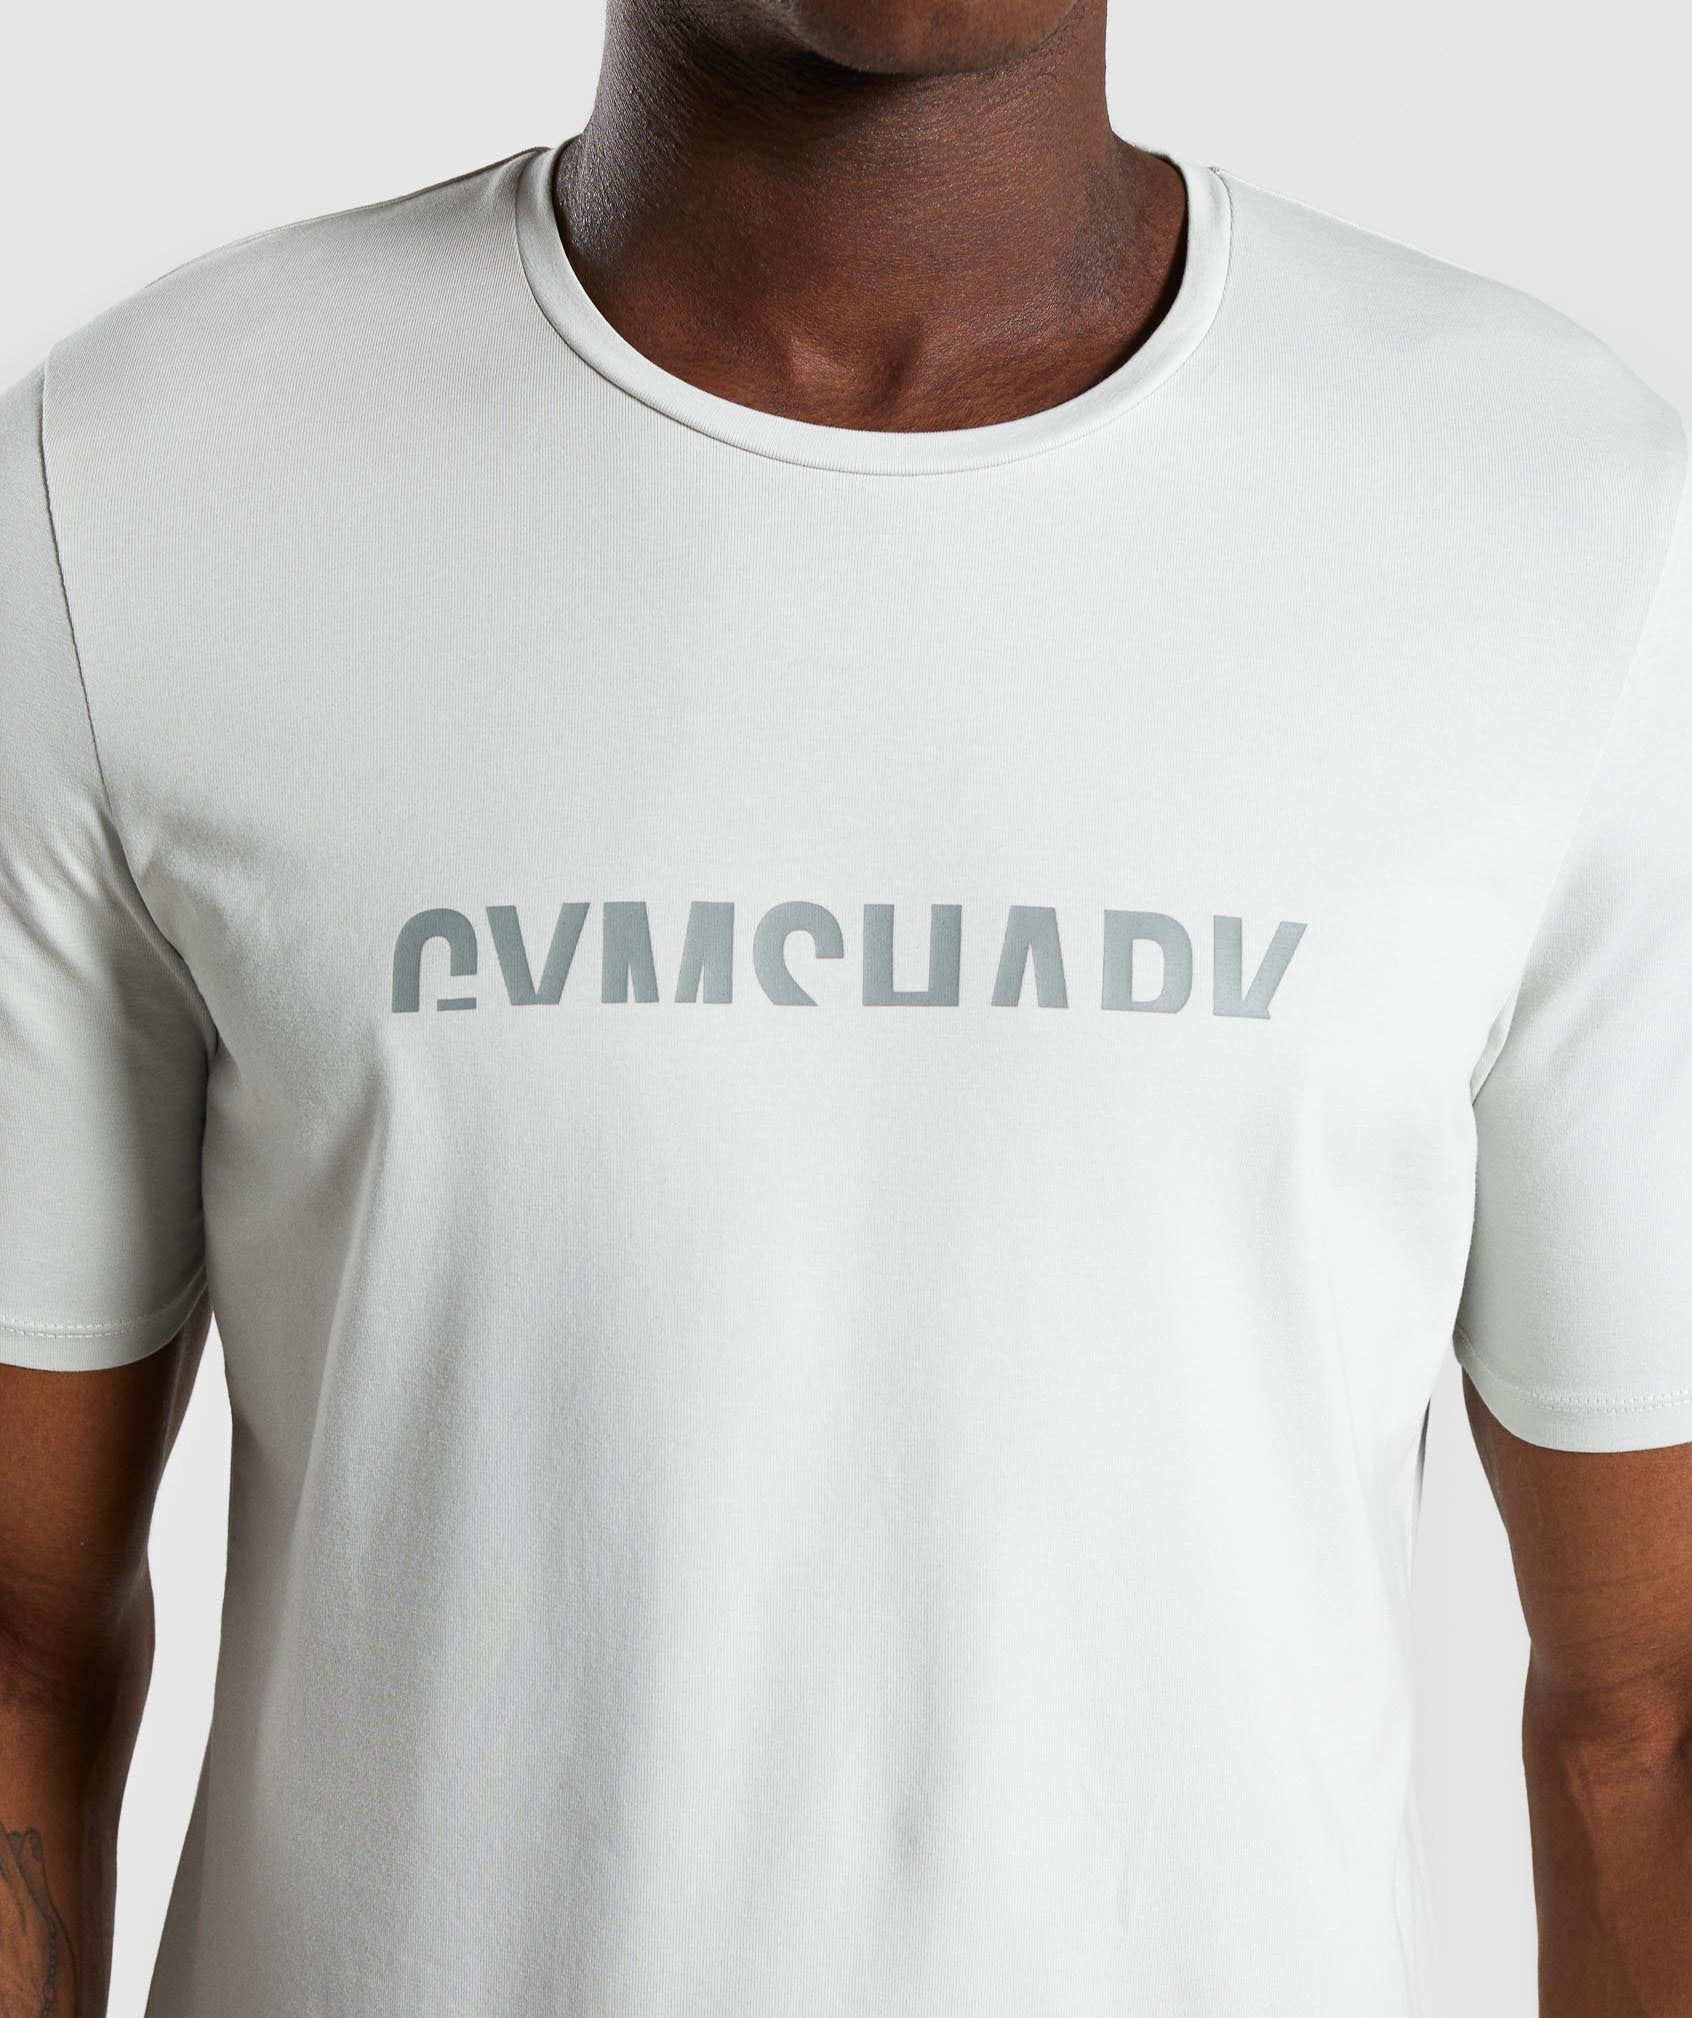 Divide T-Shirt in Pastel Green - view 6